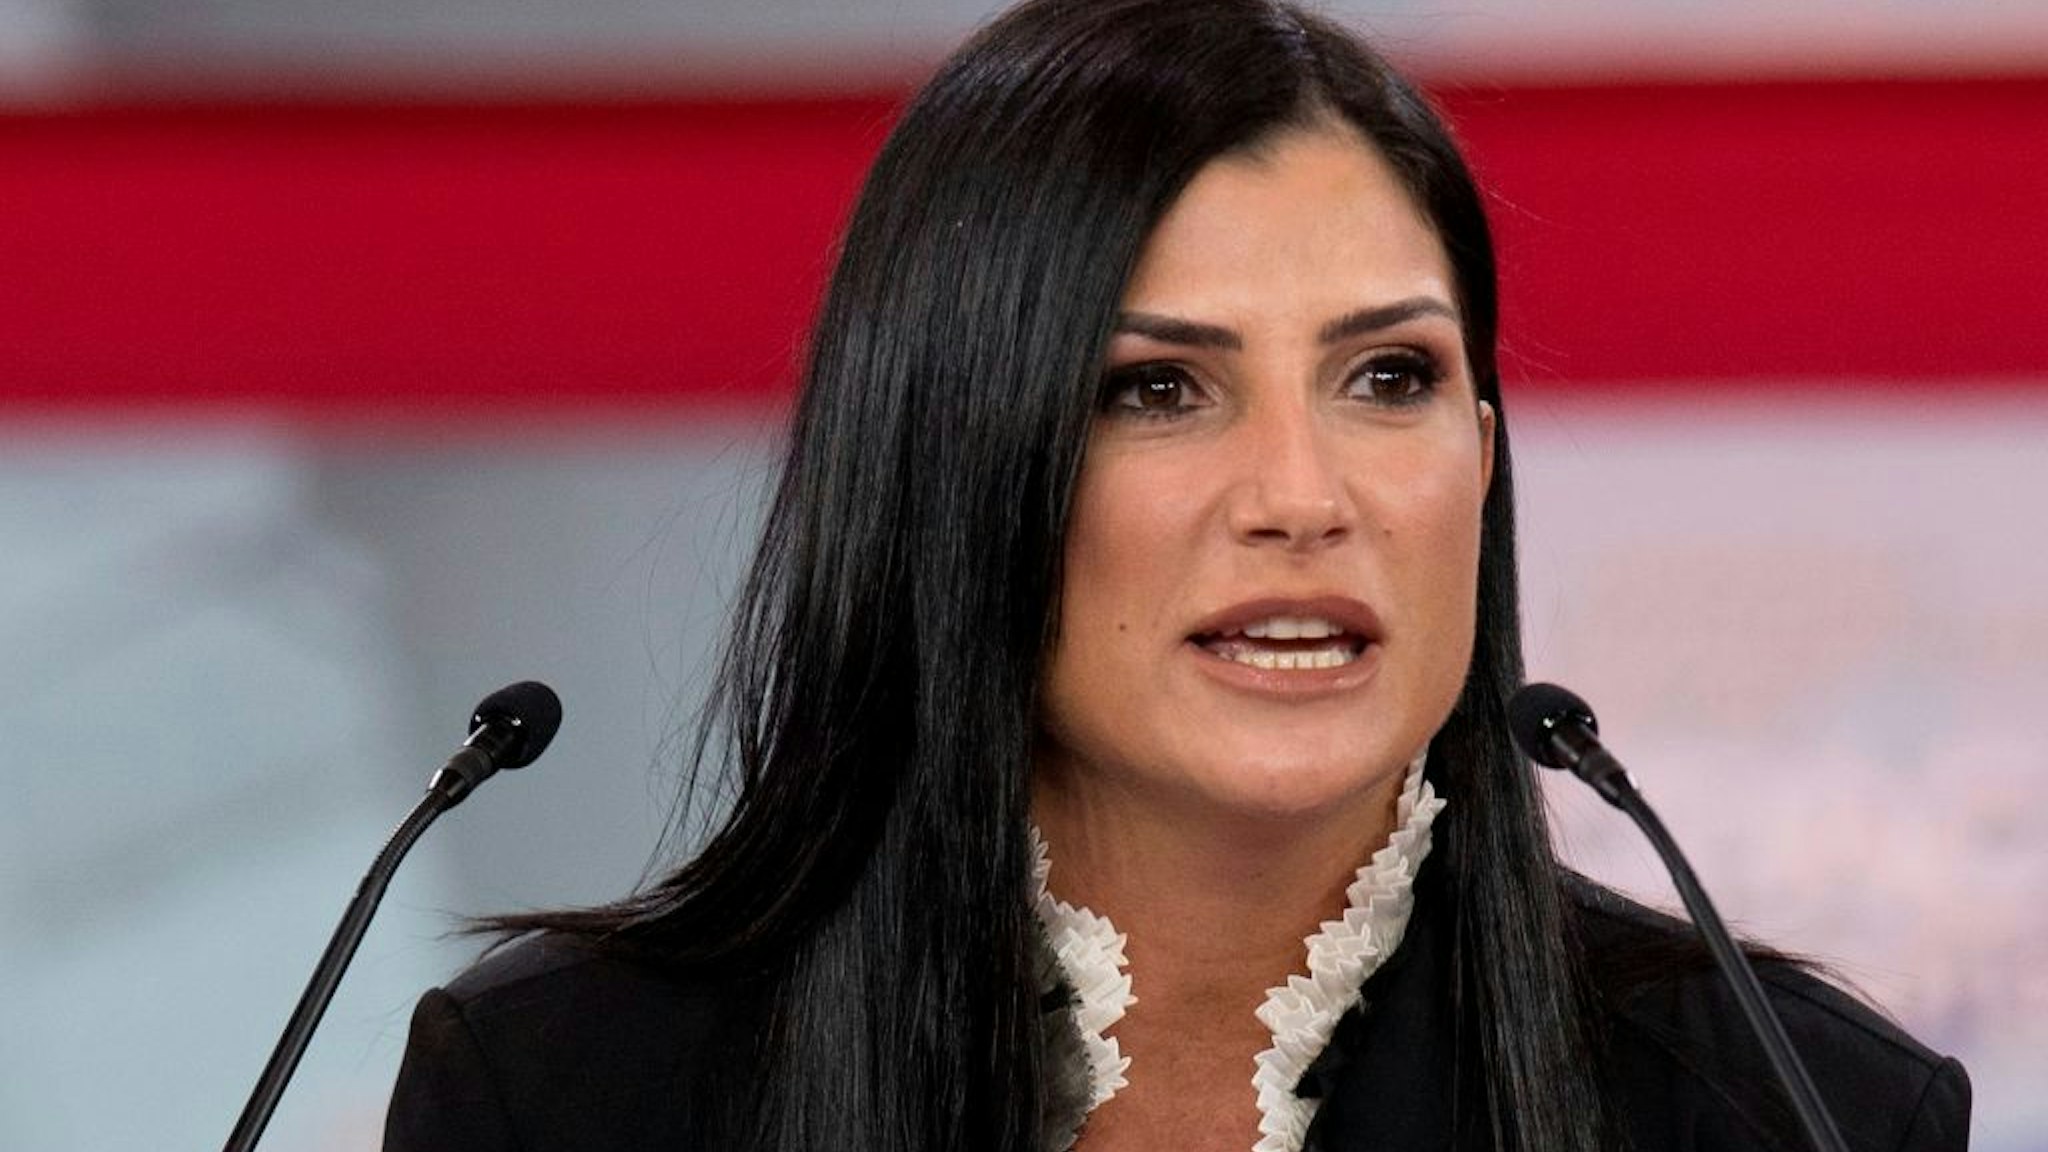 Spokesperson for the National Rifle Association (NRA) Dana Loesch speaks during the 2018 Conservative Political Action Conference at National Harbor in Oxon Hill, Maryland on February 22, 2018. / AFP PHOTO / JIM WATSON (Photo credit should read JIM WATSON/AFP via Getty Images)